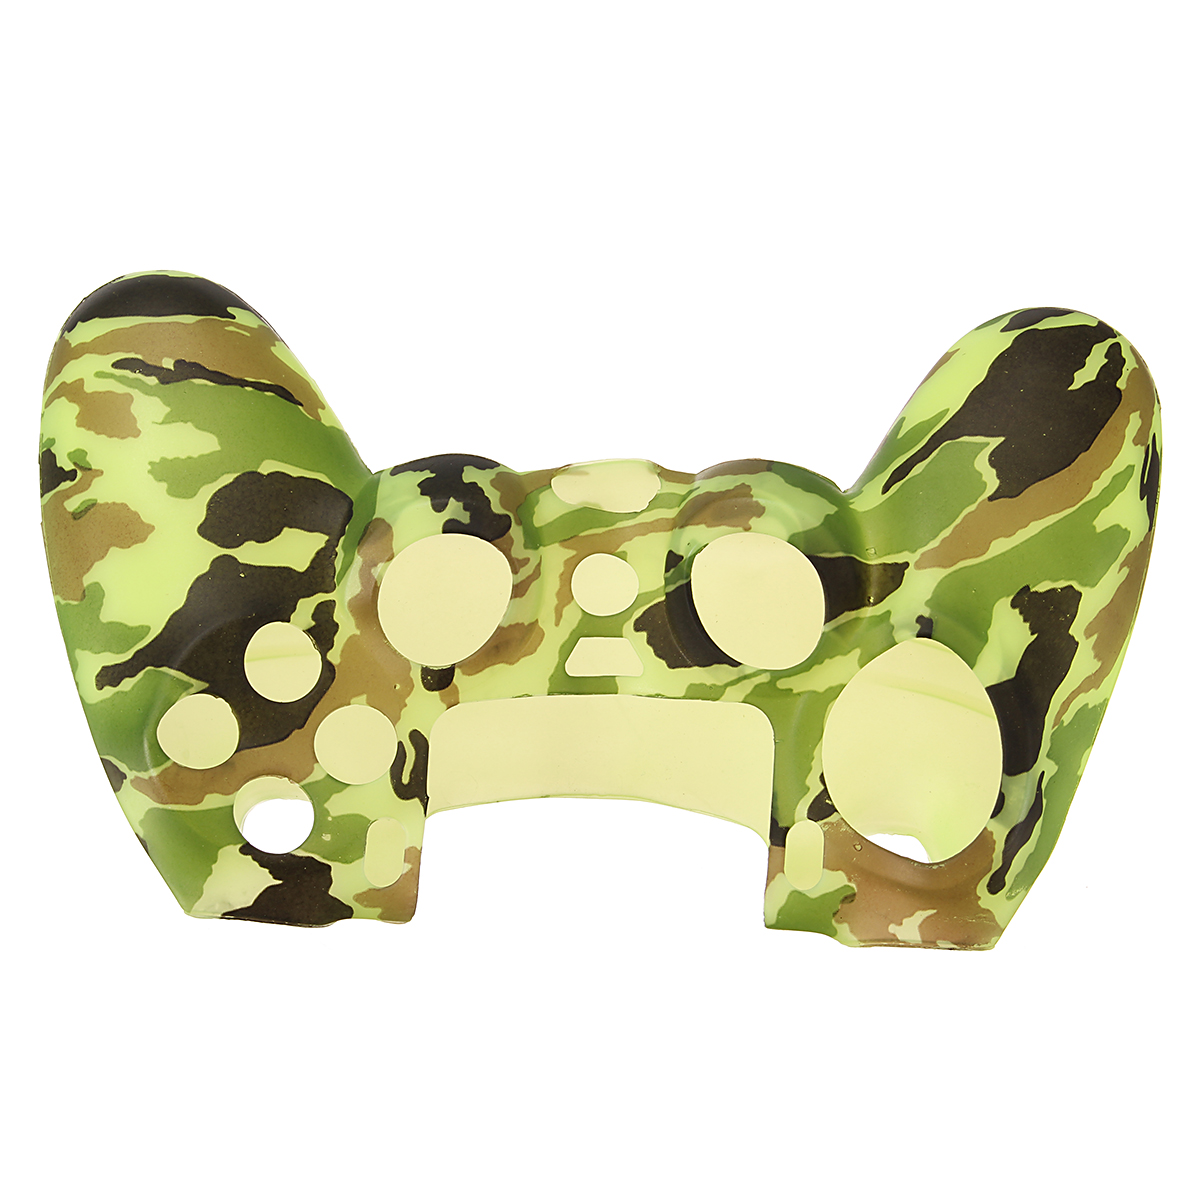 Durable Decal Camouflage Grip Cover Case Silicone Rubber Soft Skin Protector for Playstation 4 for Dualshock 4 Gamepad 14